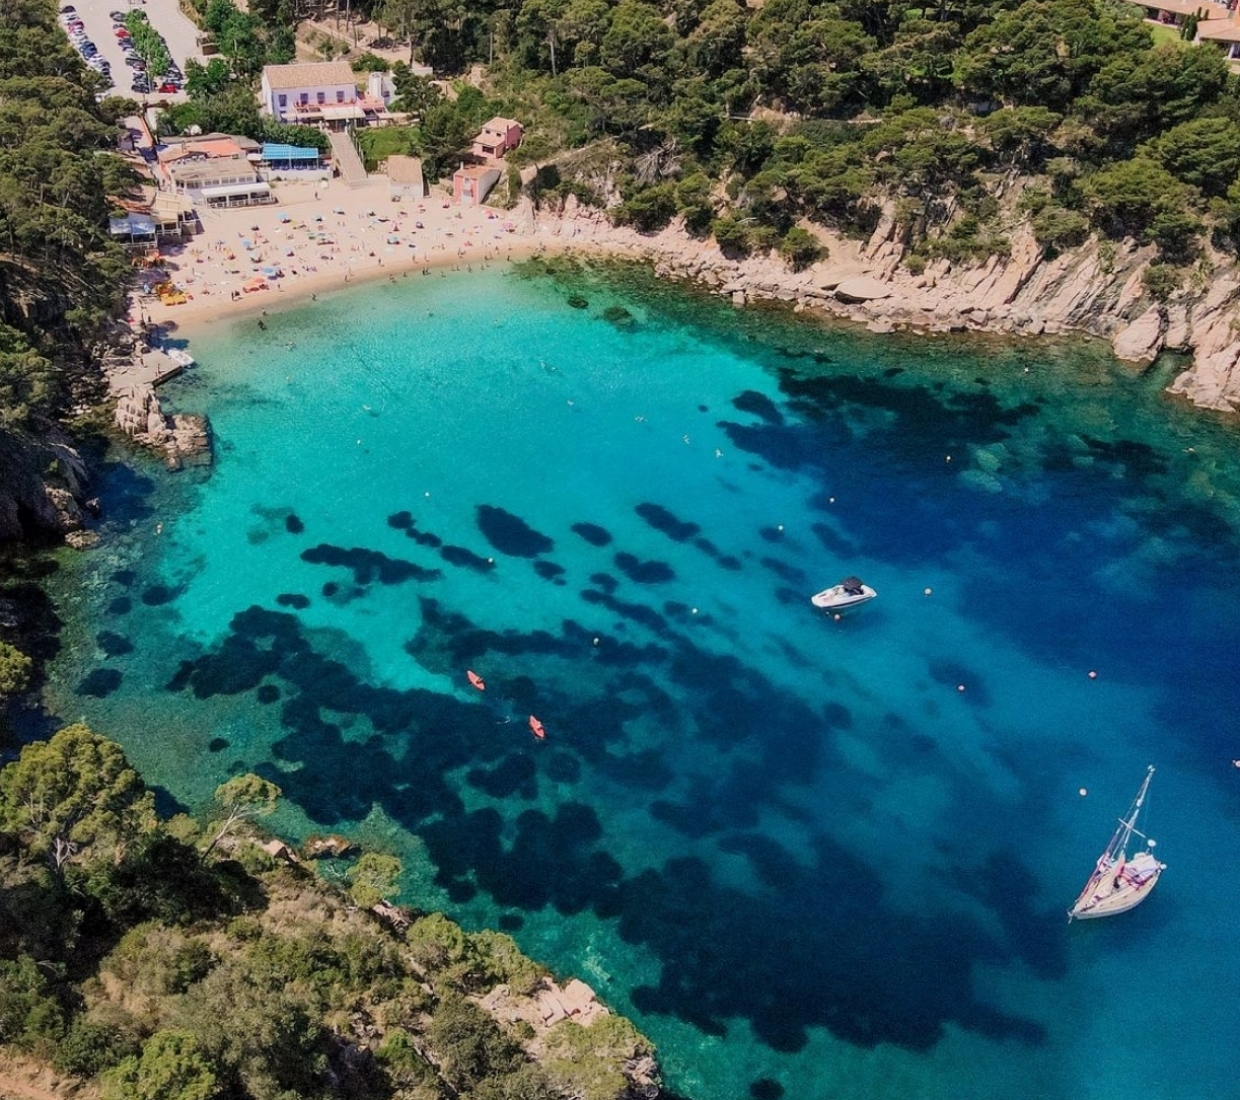 Curated guide to beautiful and authentic places to stay on the Costa Brava